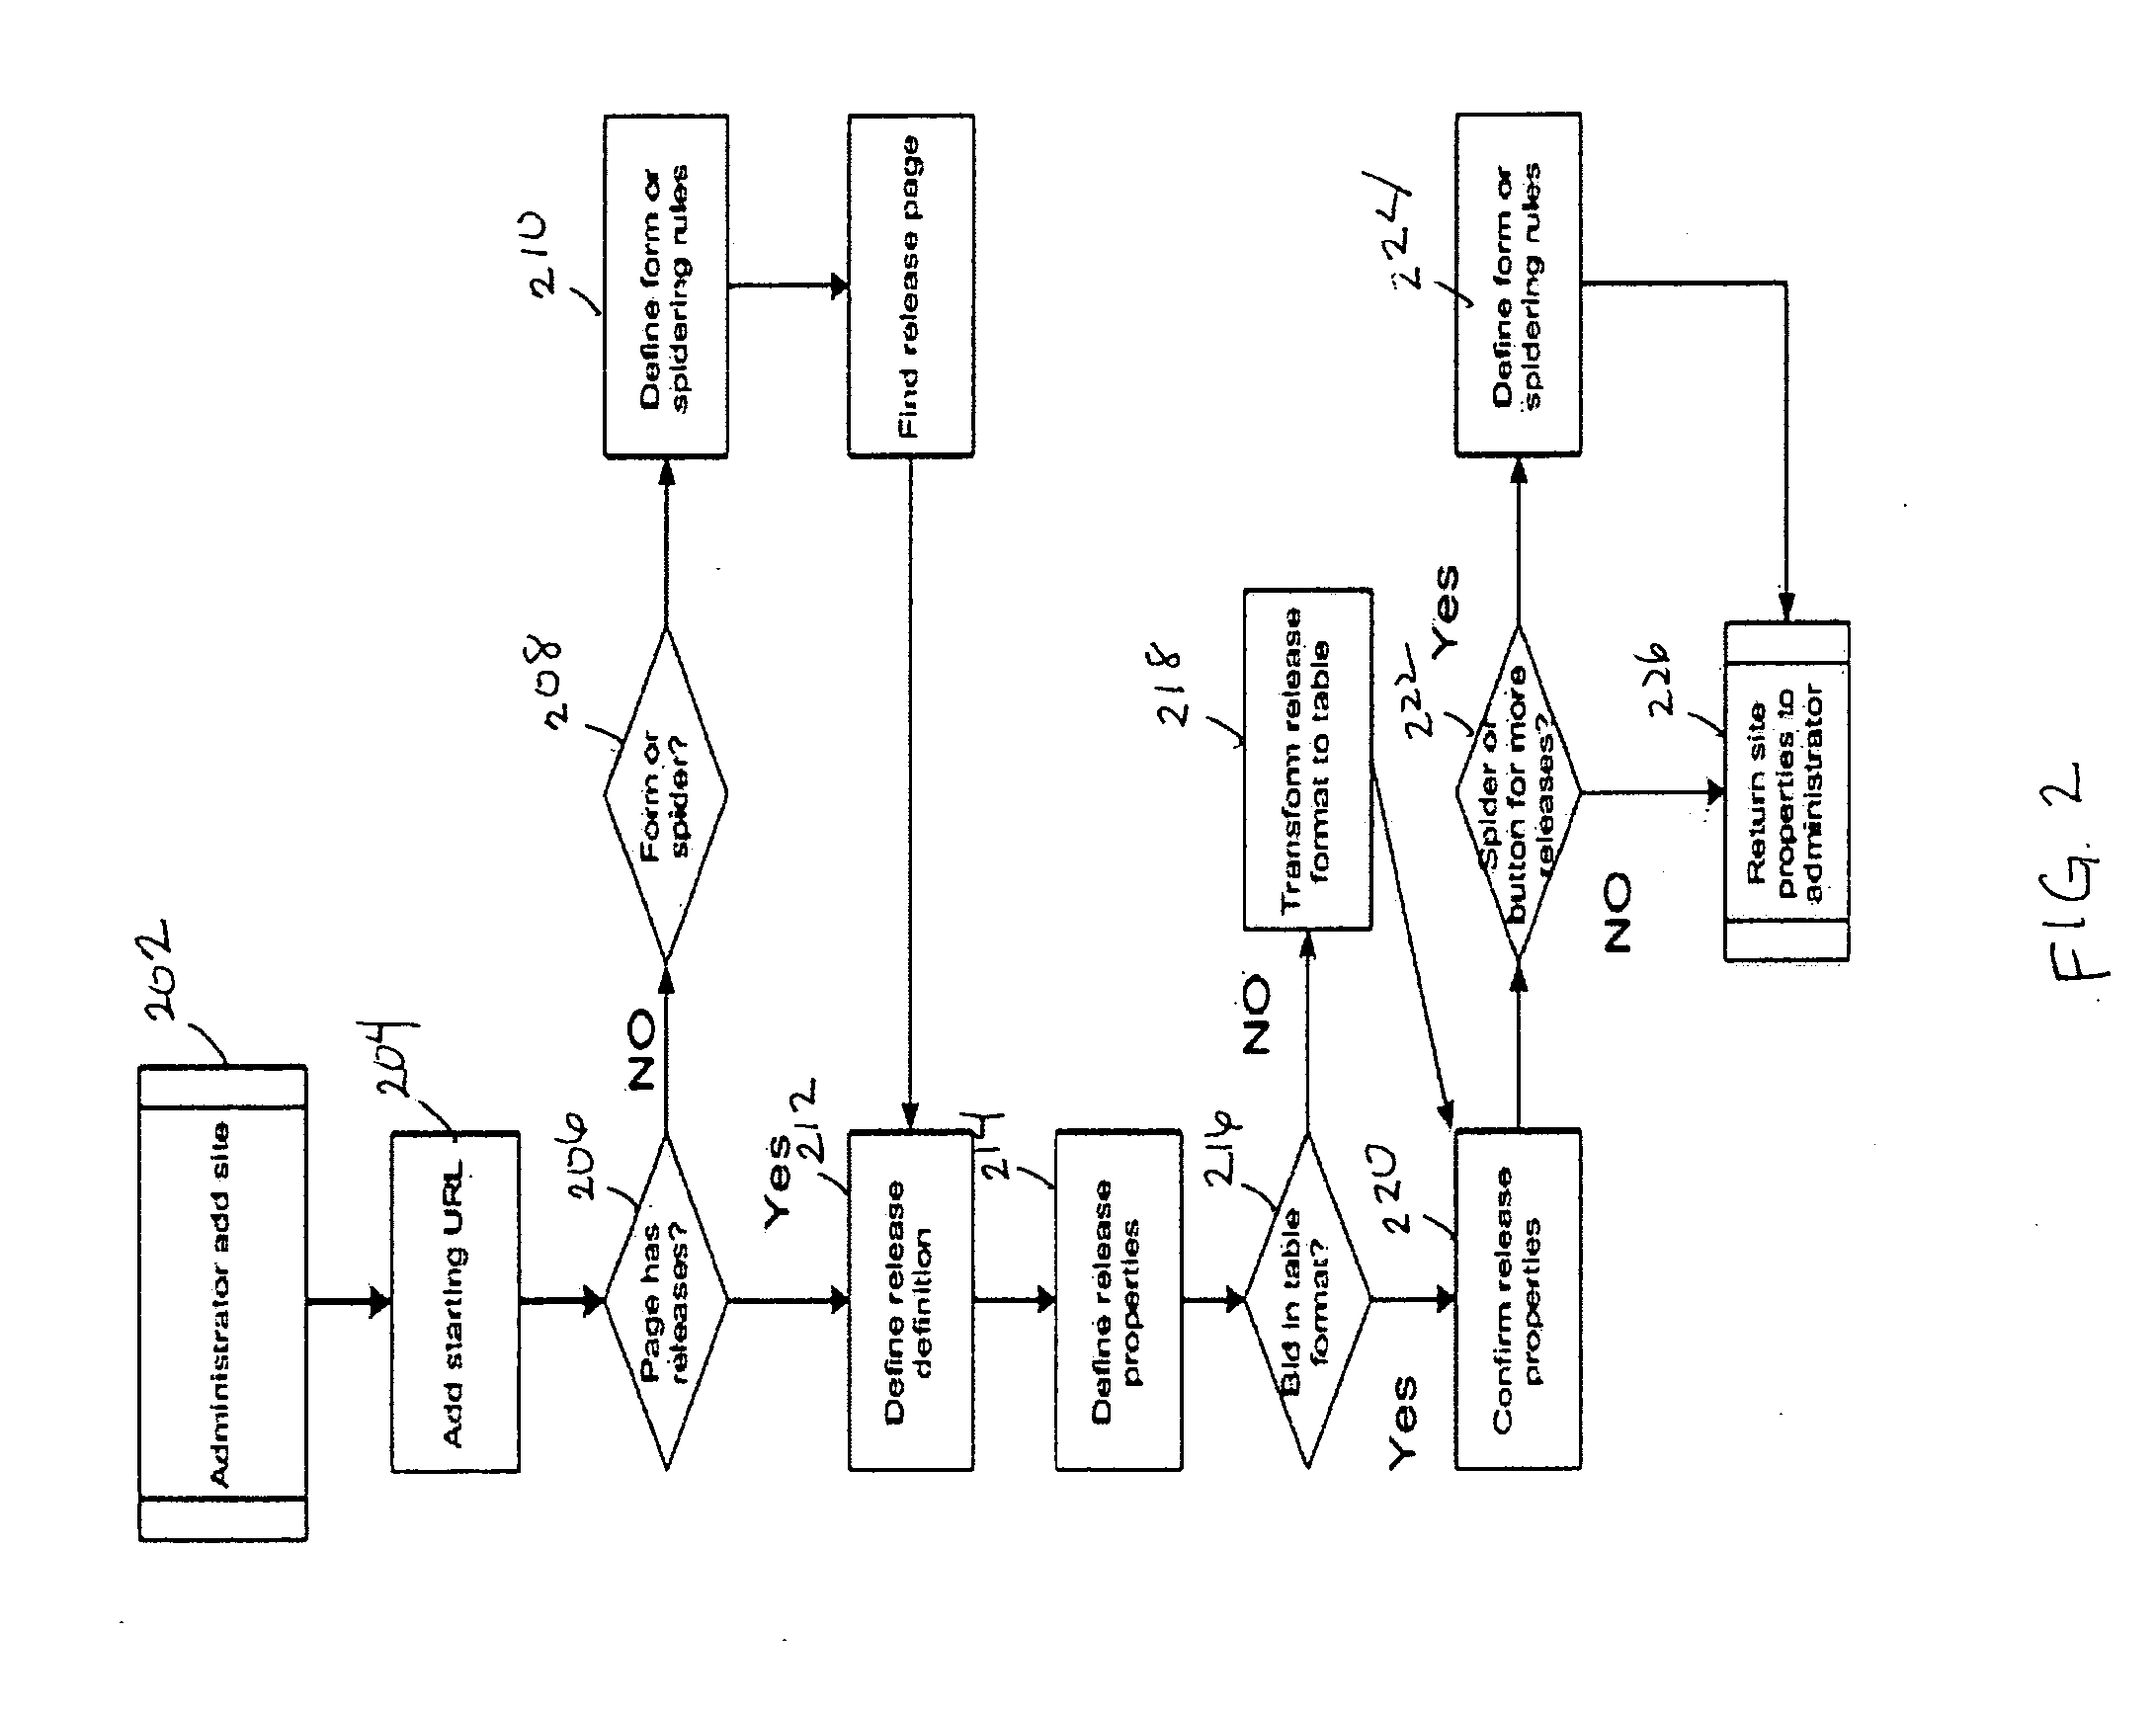 System and method for collecting, processing and presenting selected information from selected sources via a single website